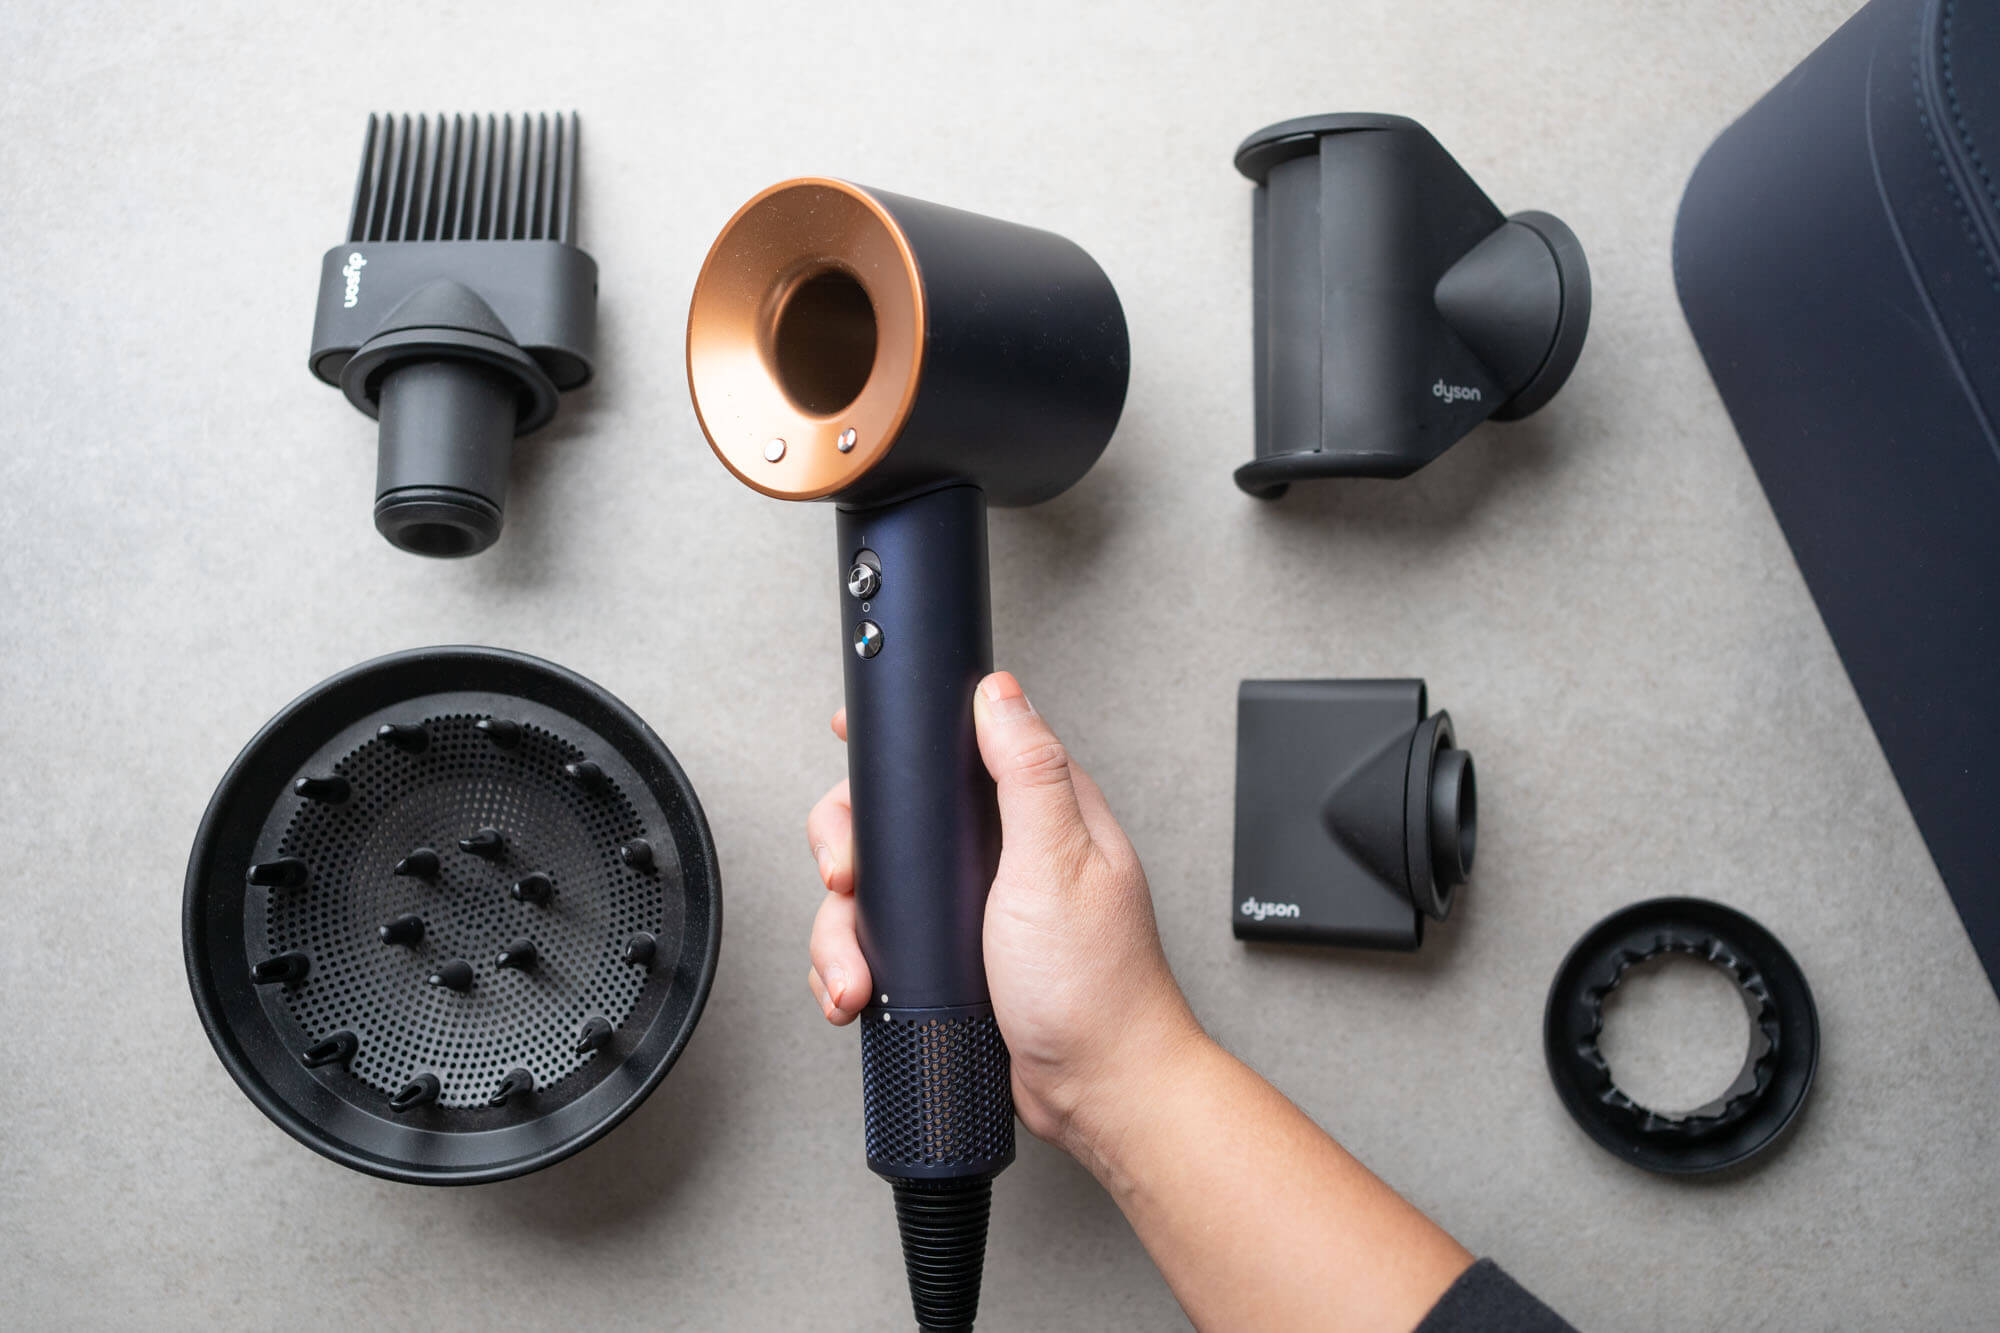 Dyson Hair Dryer vs. Airwrap: Which Is Better?